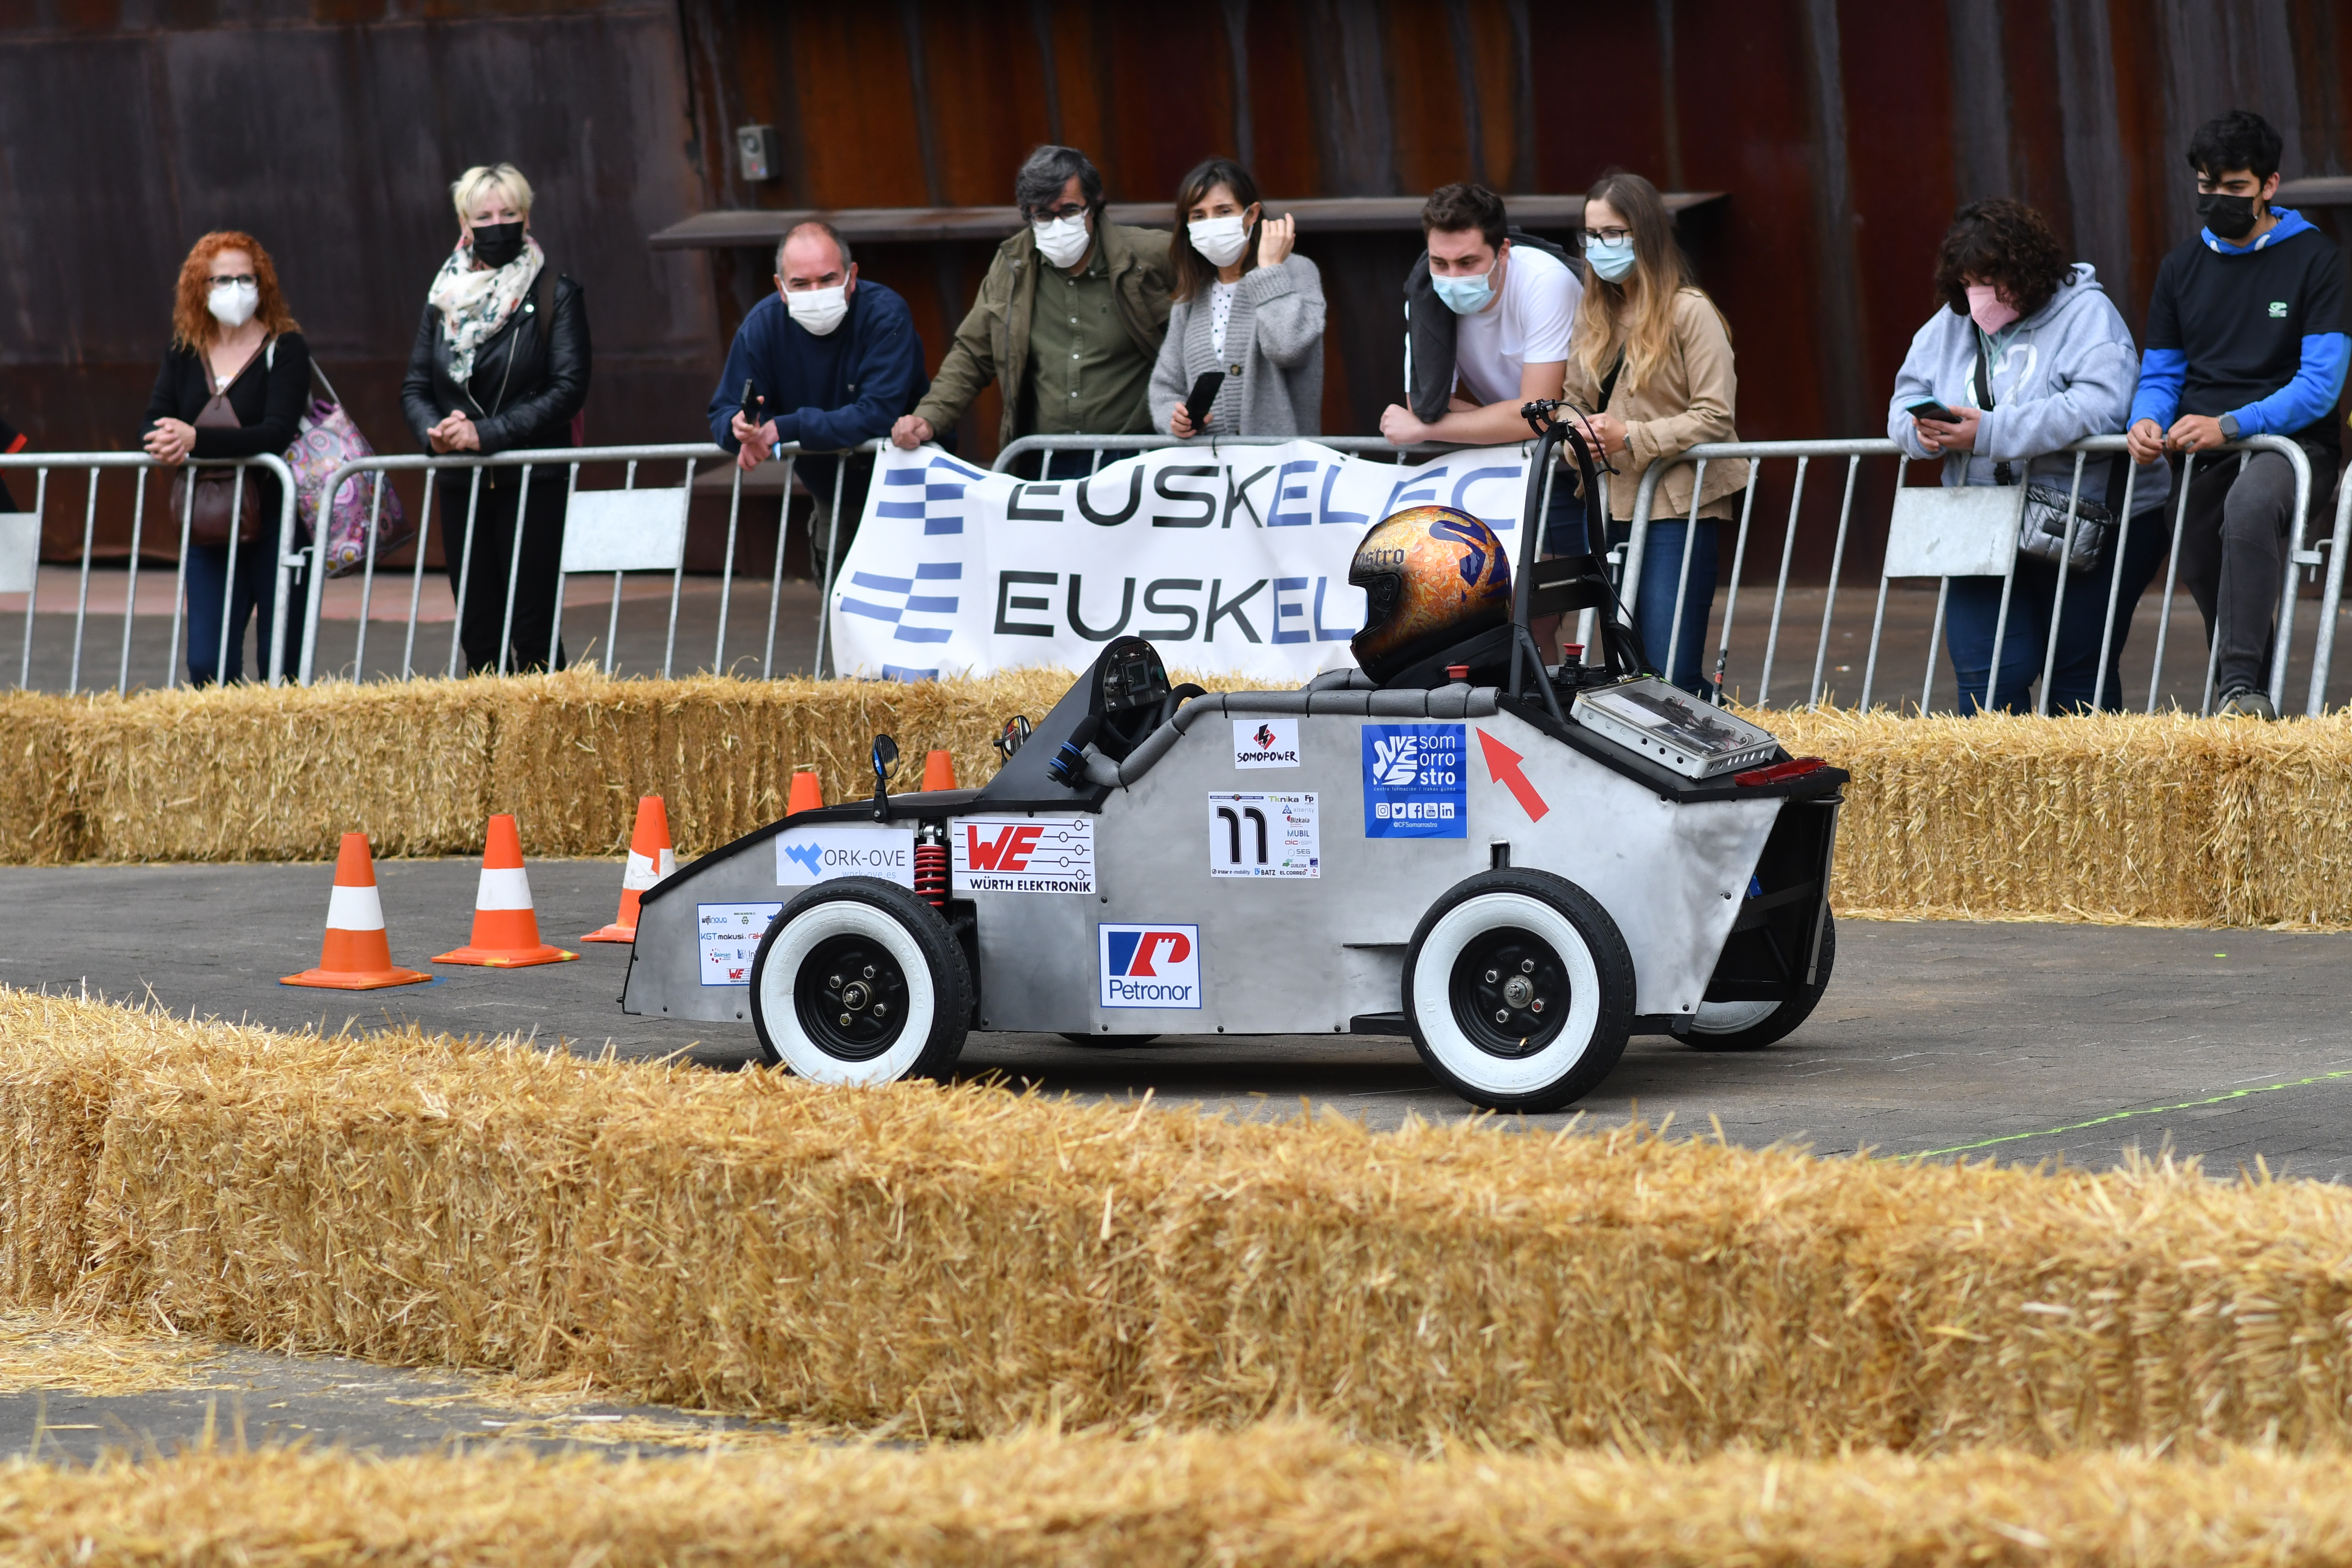 Winners in the 4th edition of the EUSKELEC 2021 race